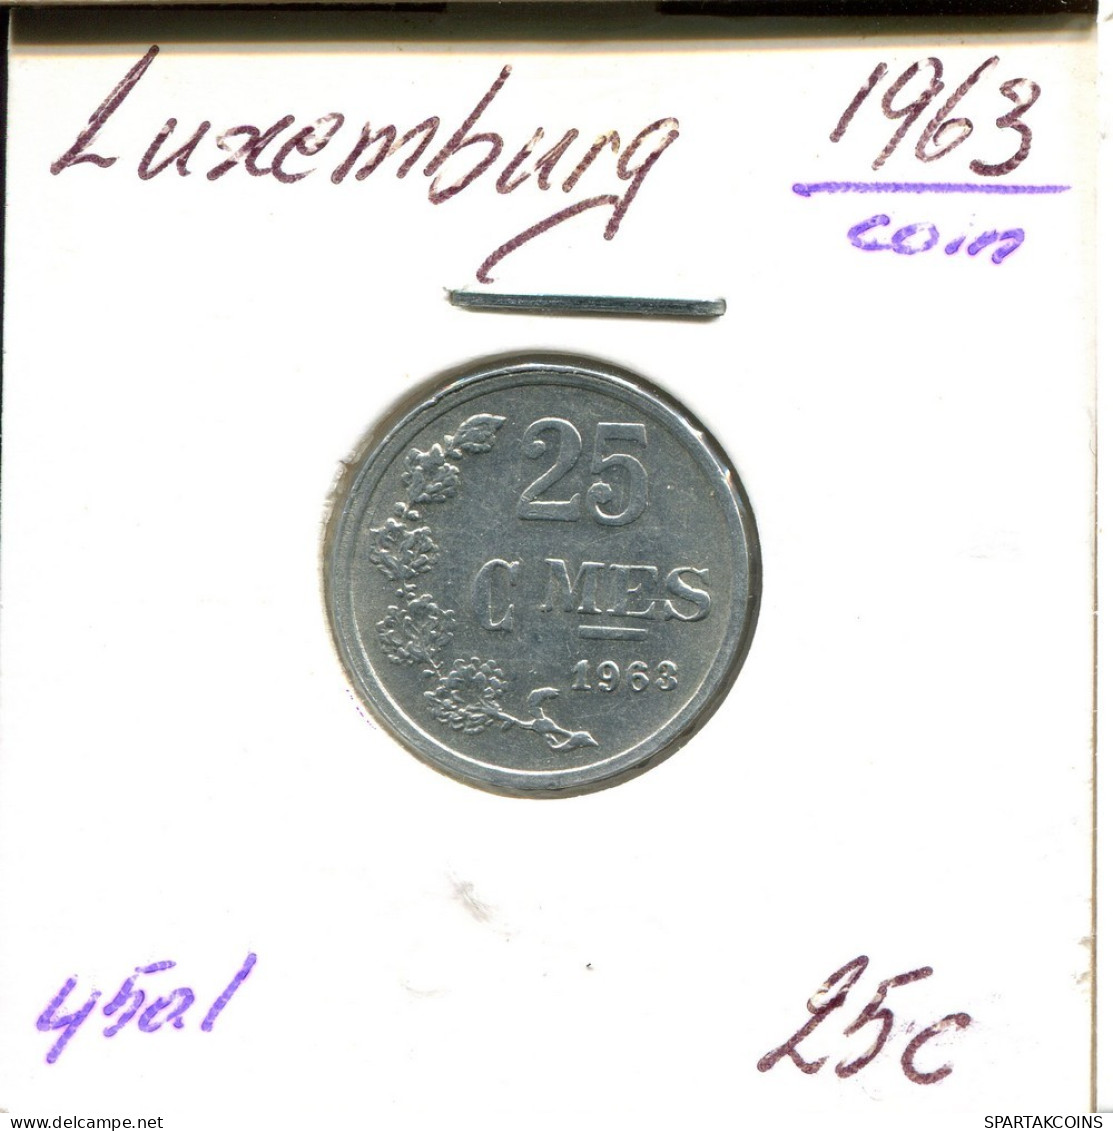 25 CENTIMES 1963 LUXEMBURG LUXEMBOURG Münze #AT193.D.A - Luxembourg